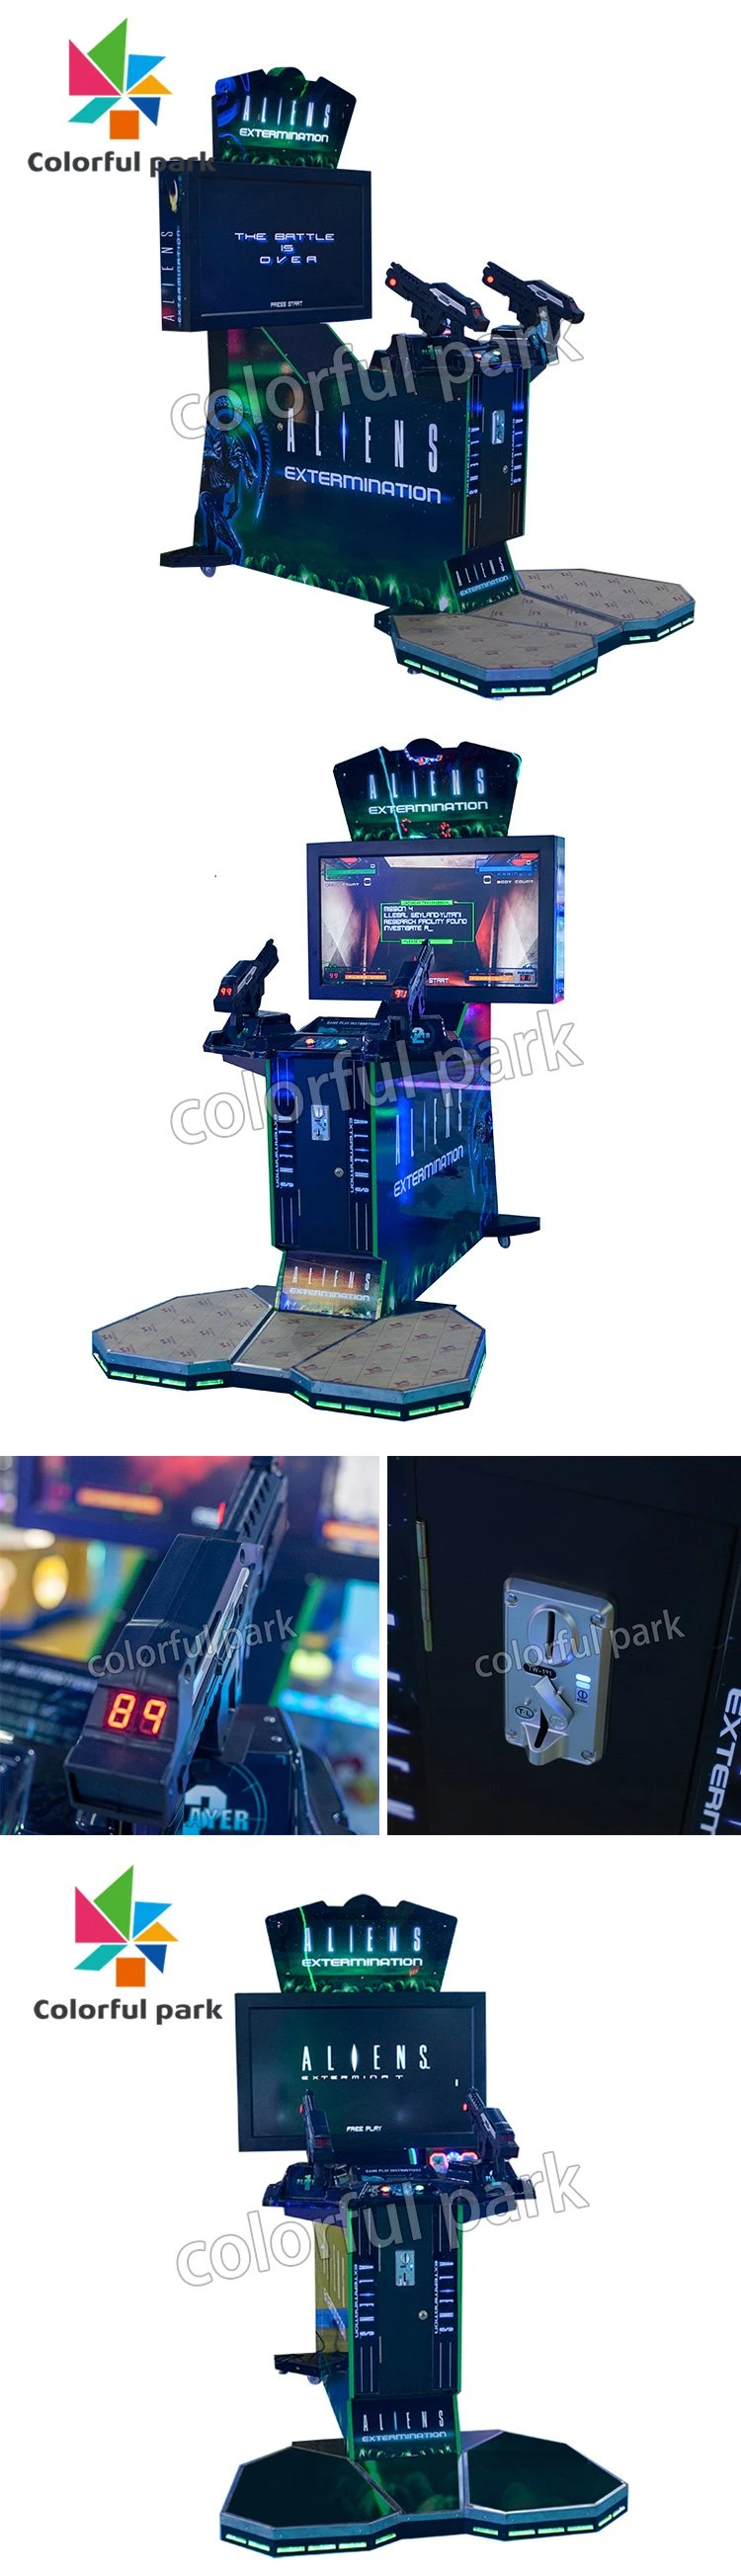 Colorful Park Aliens Arcade Game Machine Gun Game Shooting for 2 Players Video Arcade Game Machine